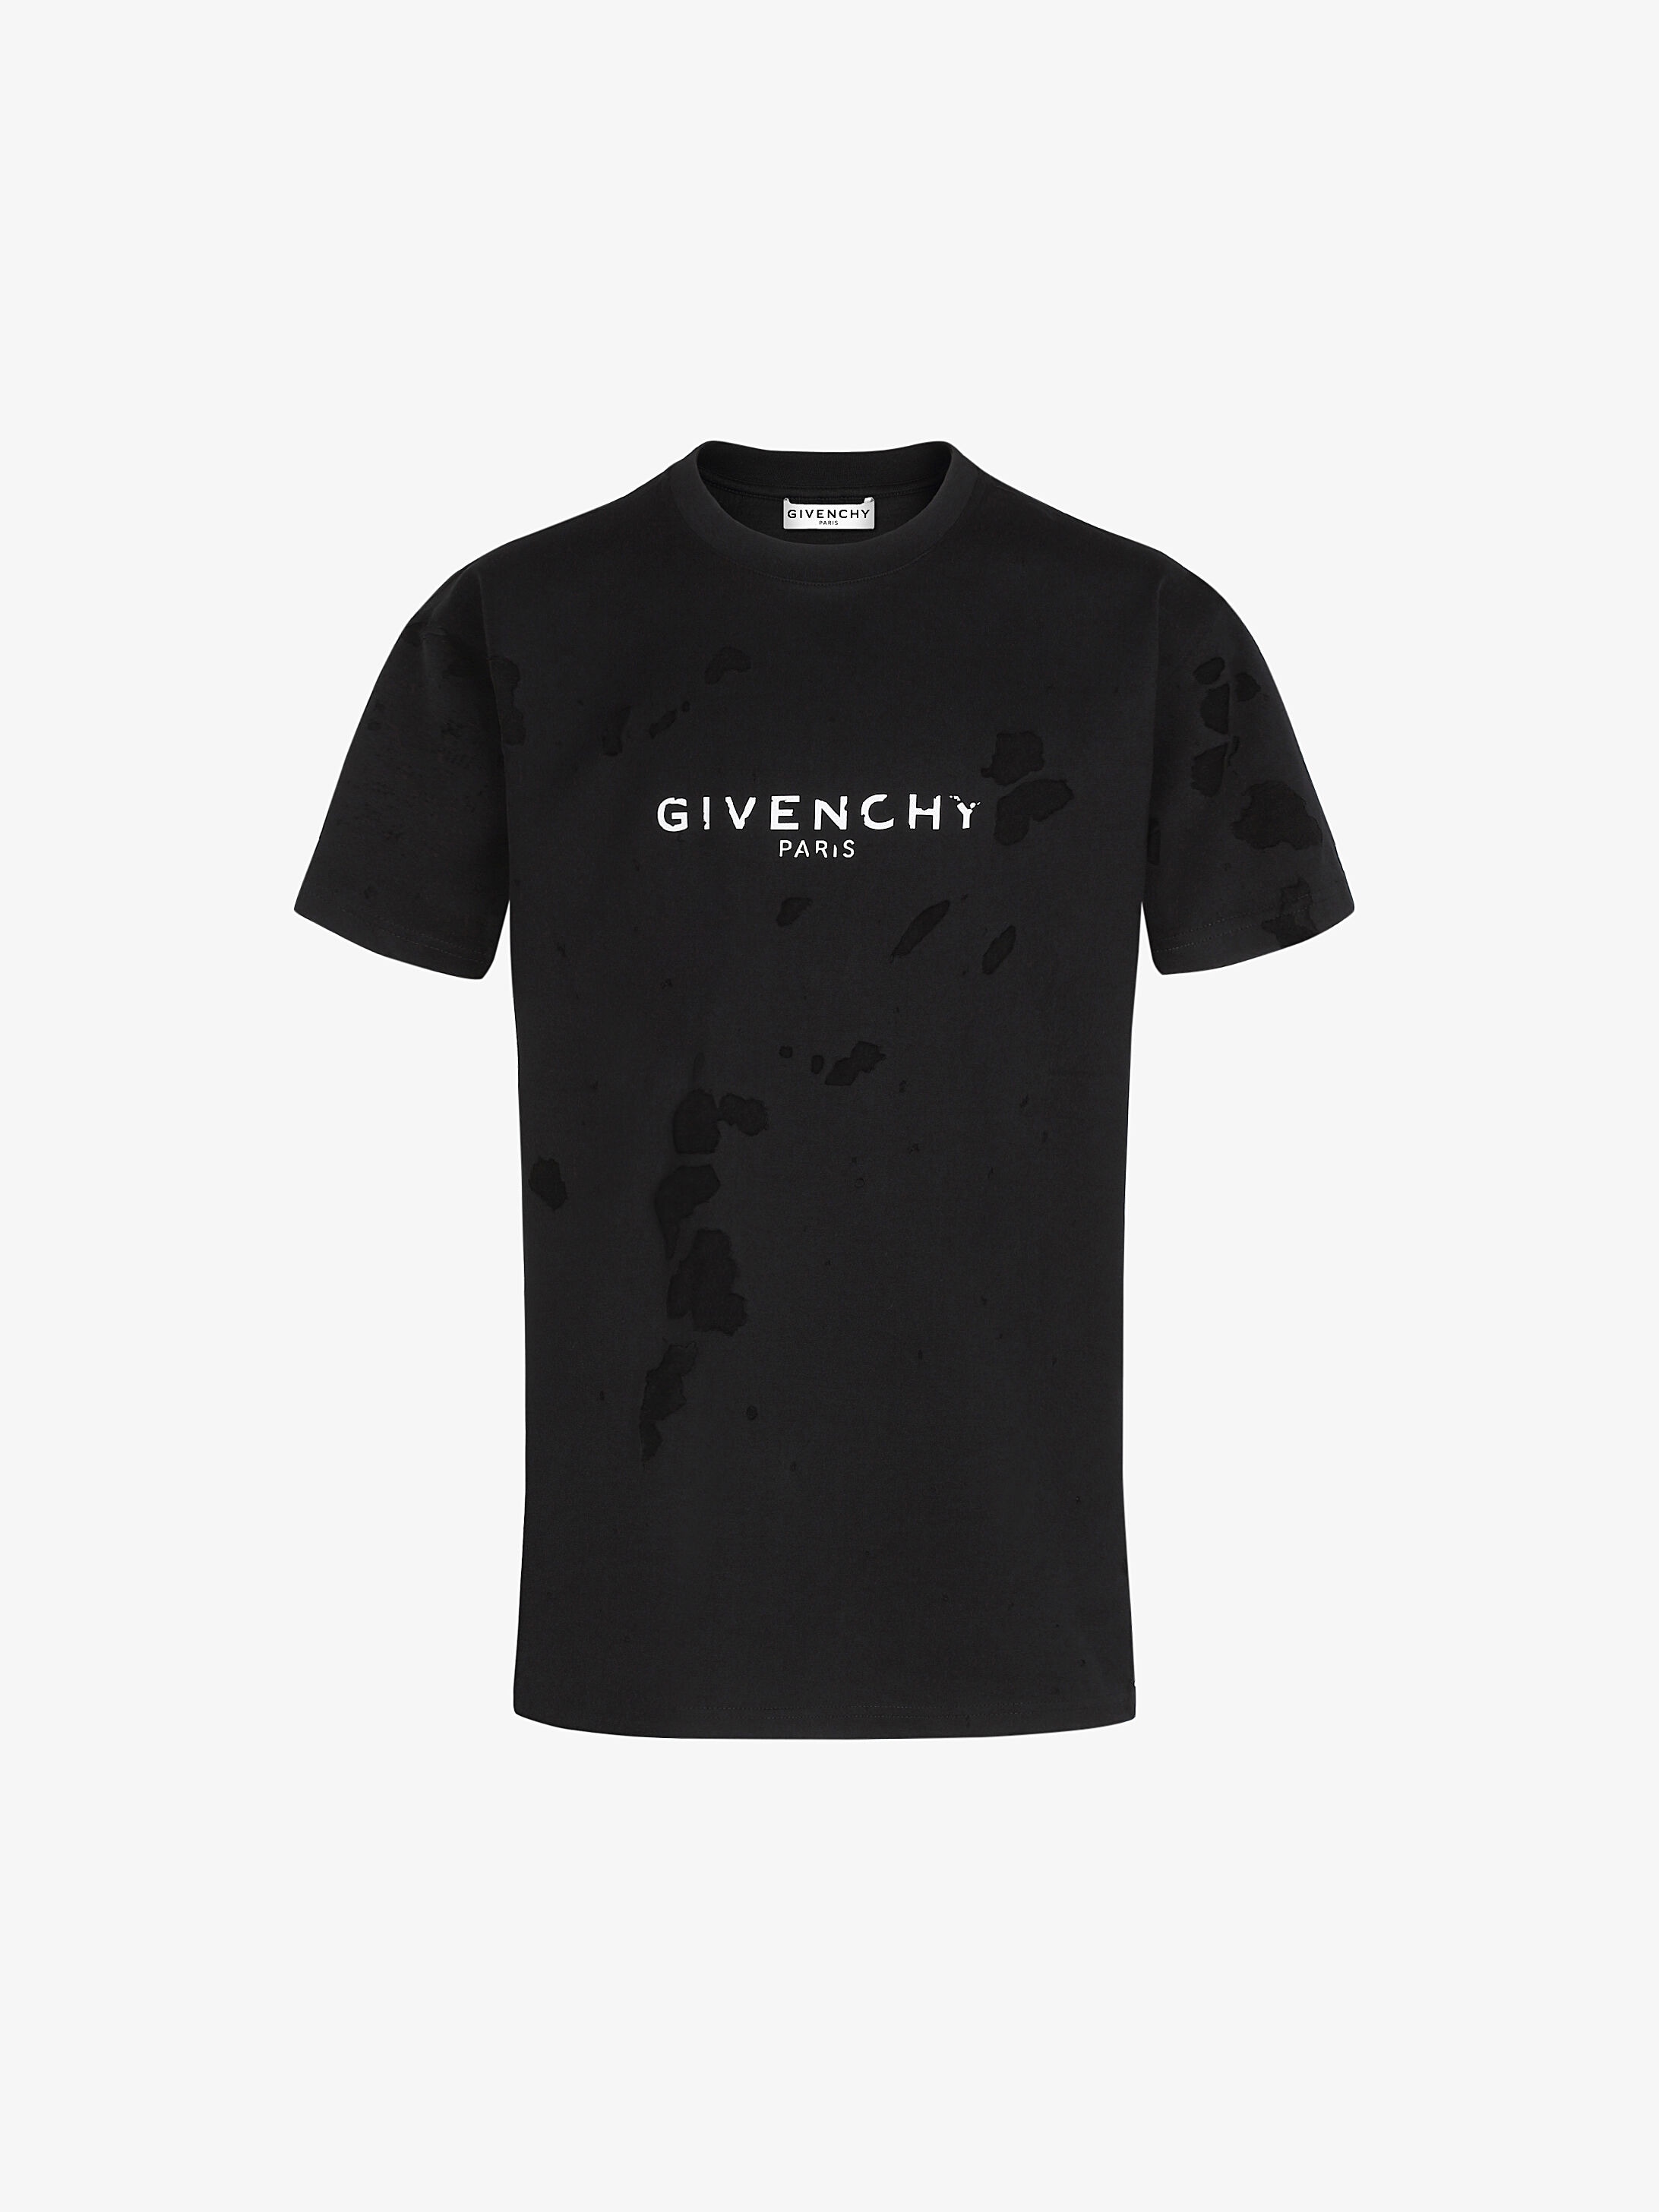 givenchy shirt destroyed